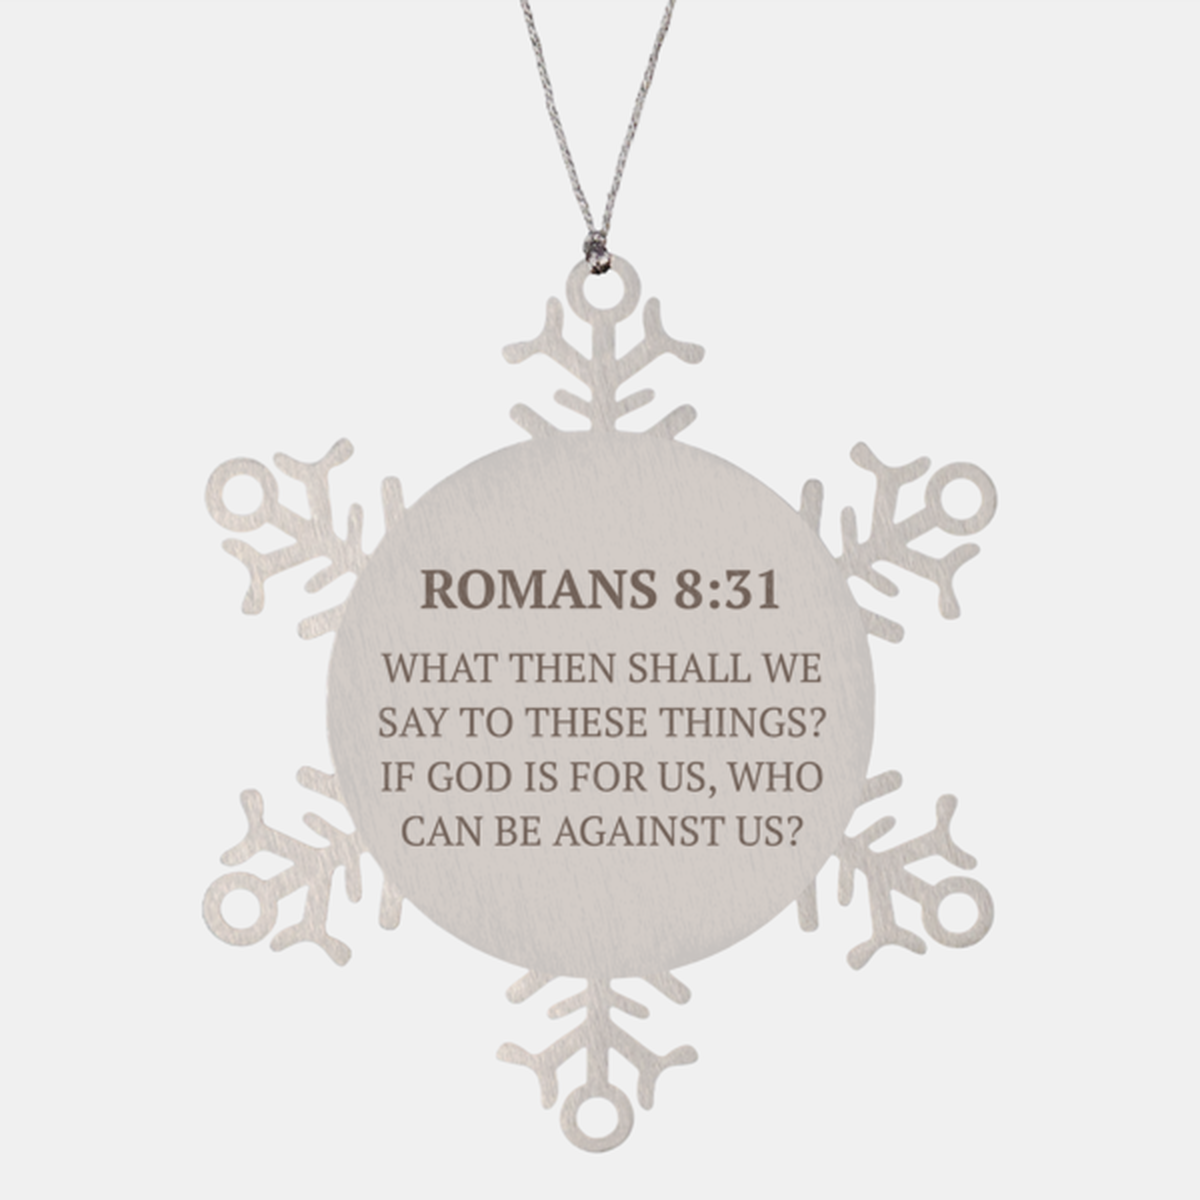 Christian Ornaments For Christmas Tree, What Then Shall We Say To These Things, Religious Christmas Decorations, Scripture Ornaments Gifts, Bible Verse Ornament